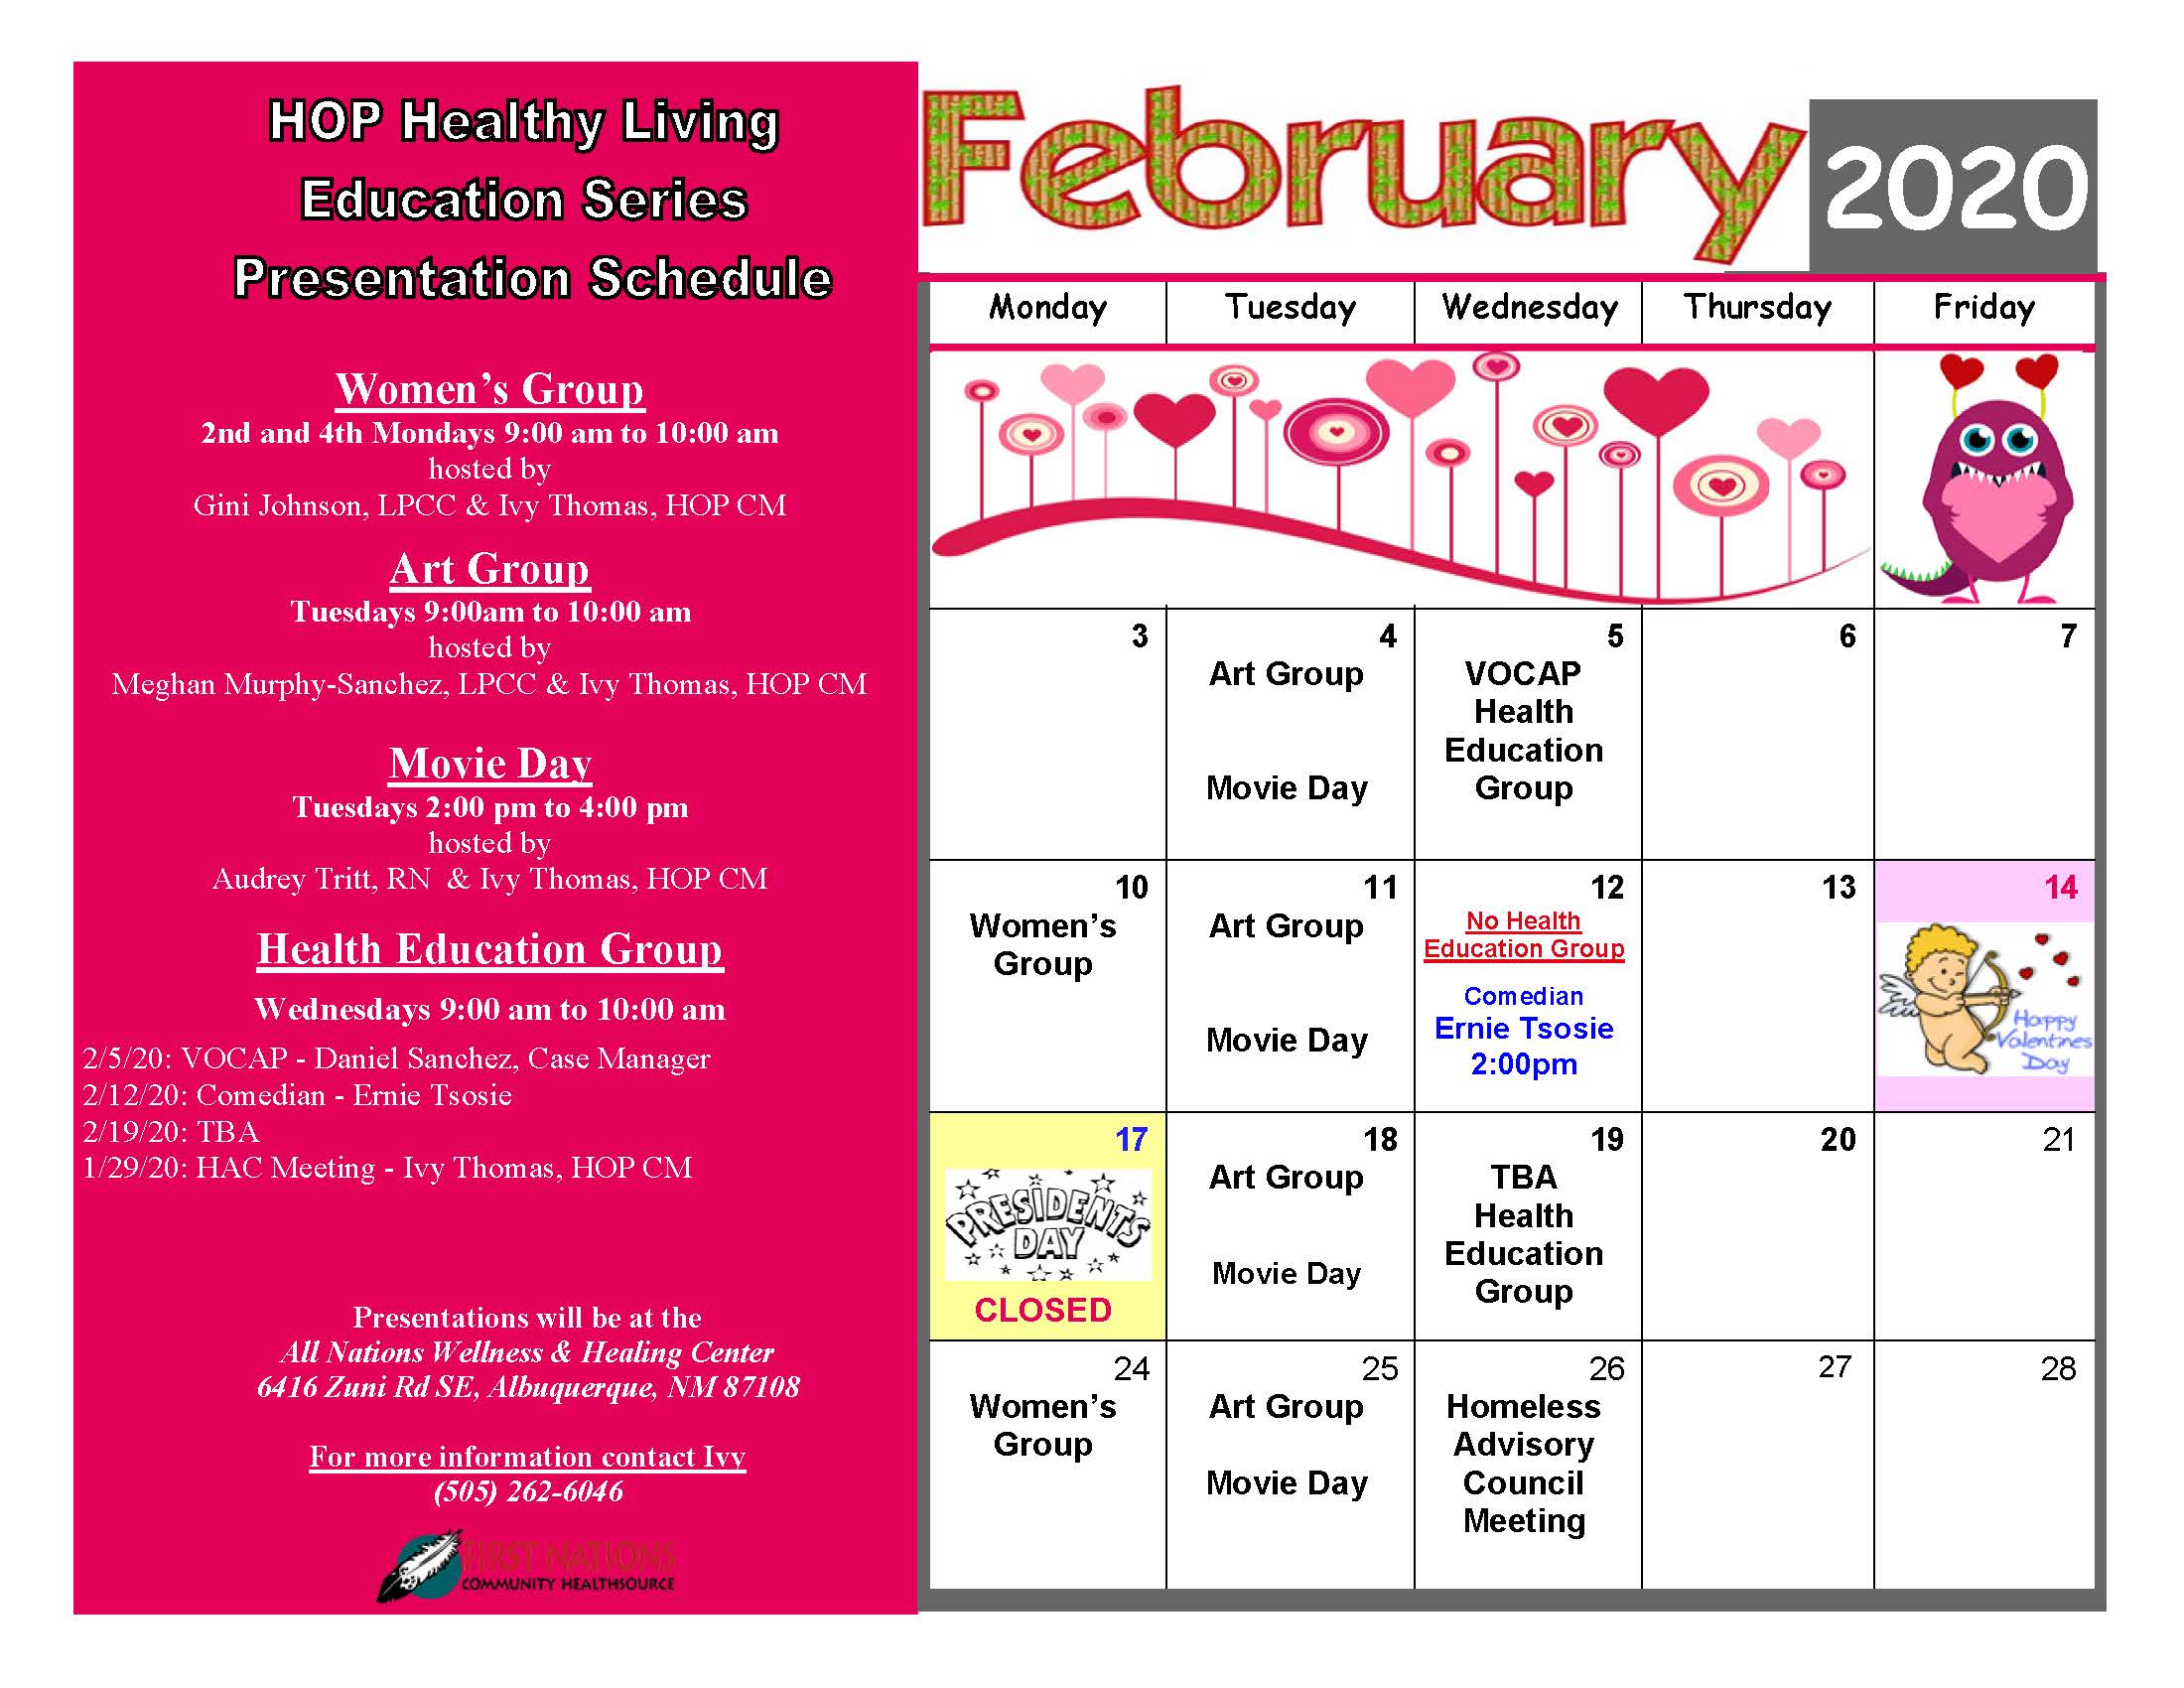 HOP Healthy Living Education Series Presentation Schedule February 2020